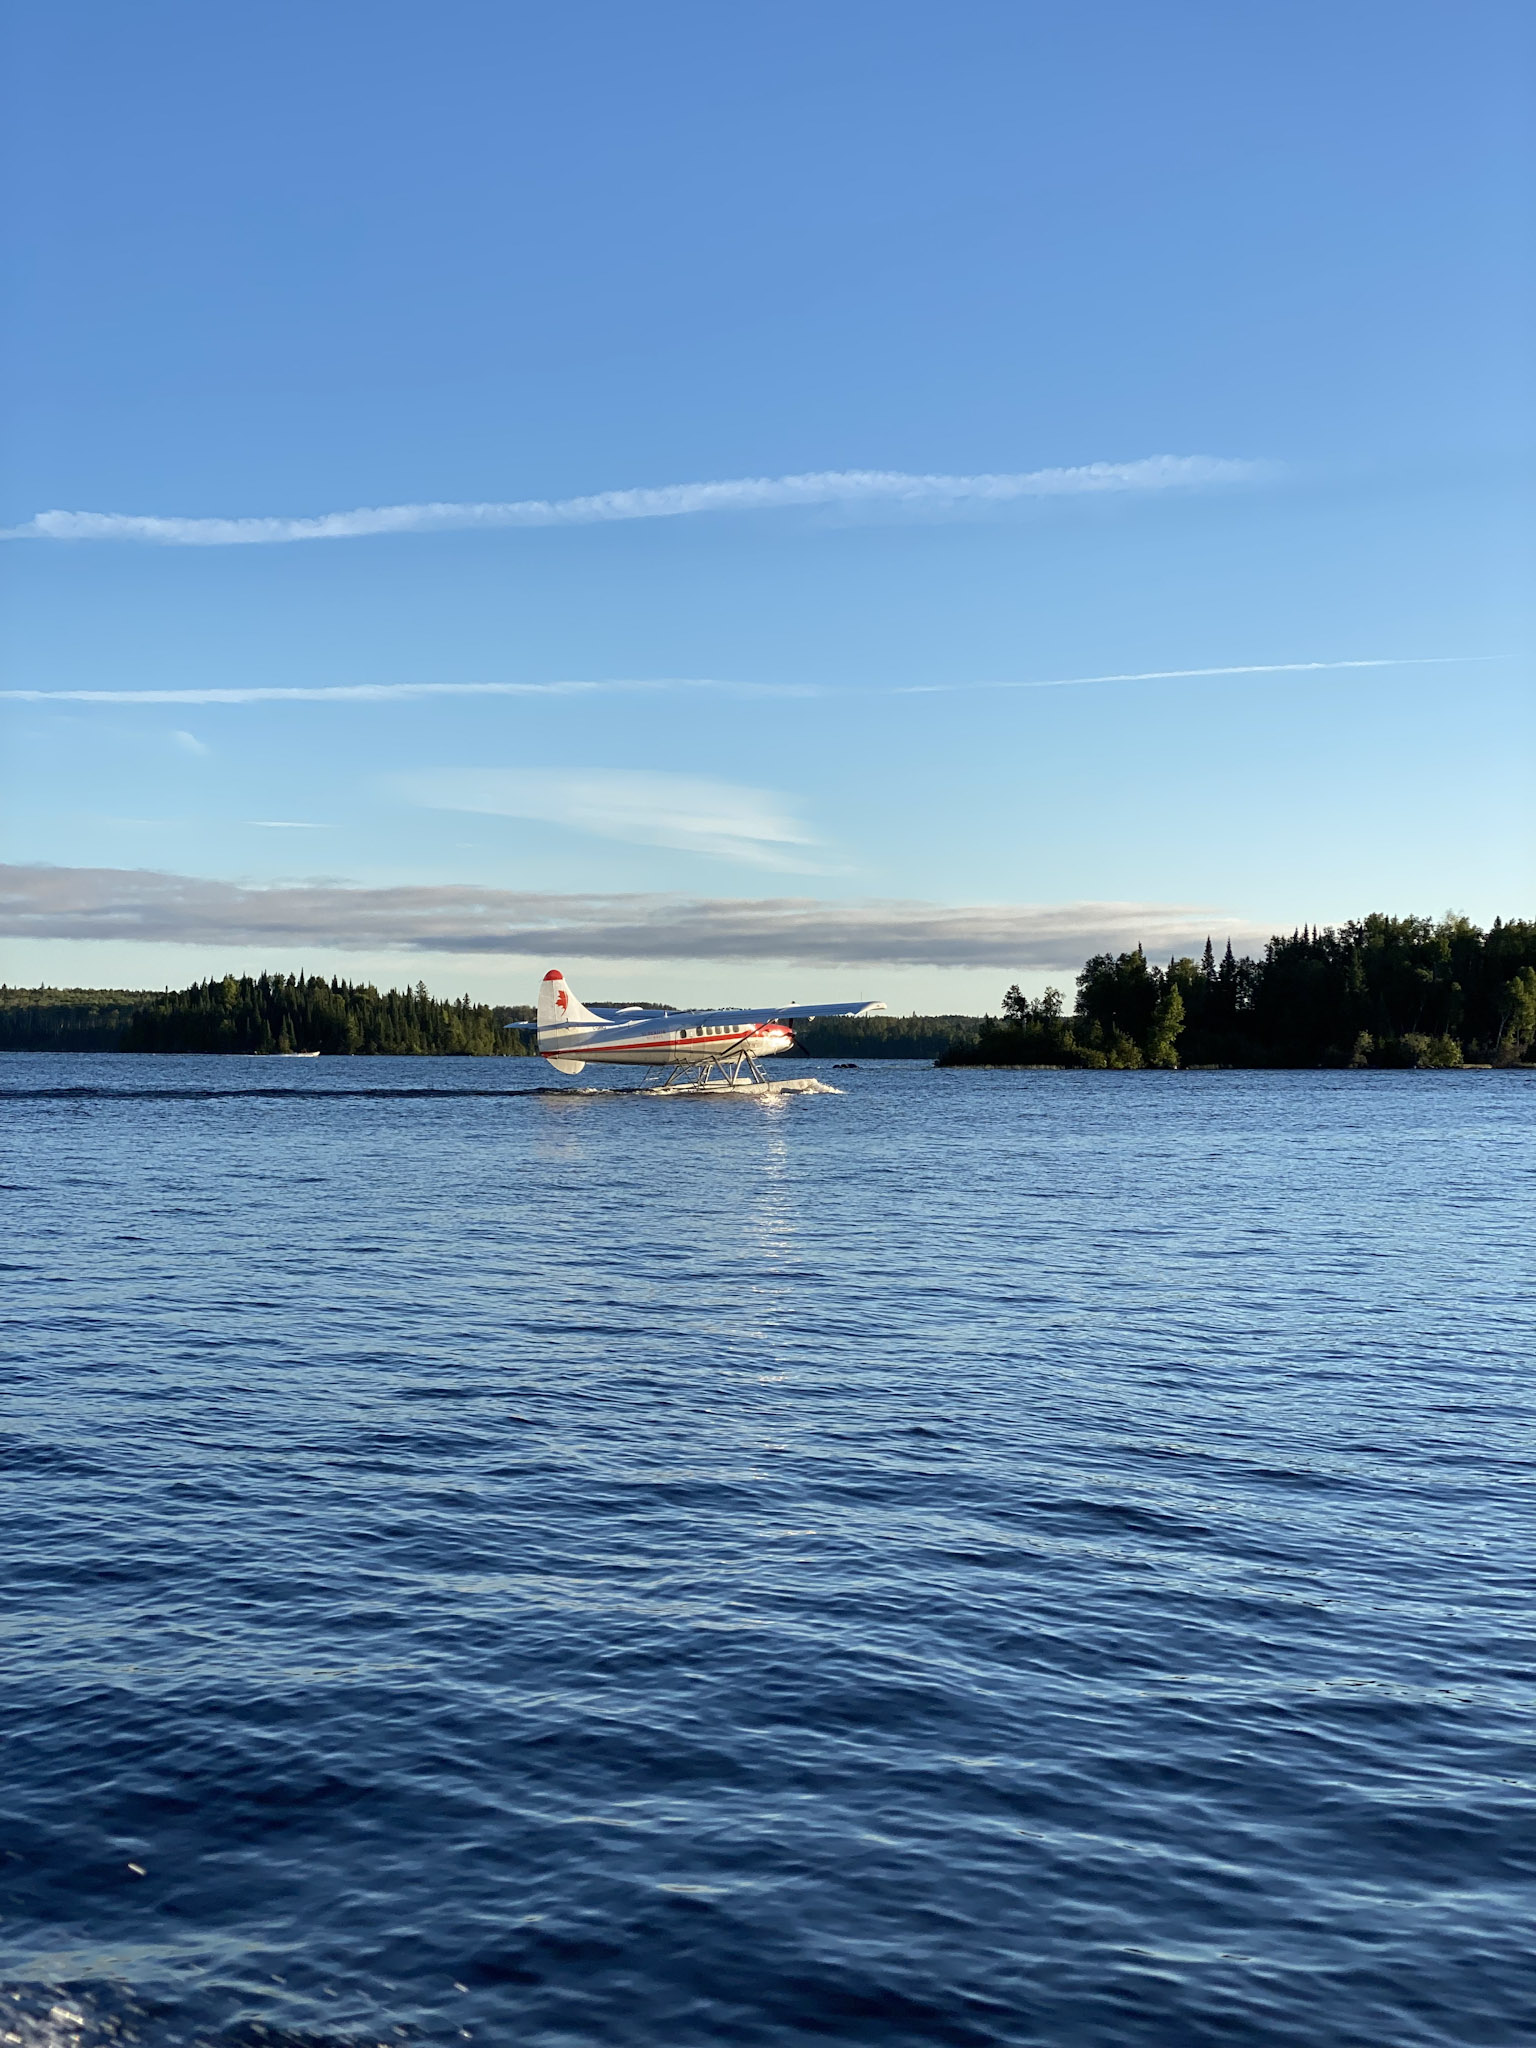 a red and white float plane landing on an expanse of very blue, shining water under a very blue sky. A band of distant forest can be seen on the horizon.